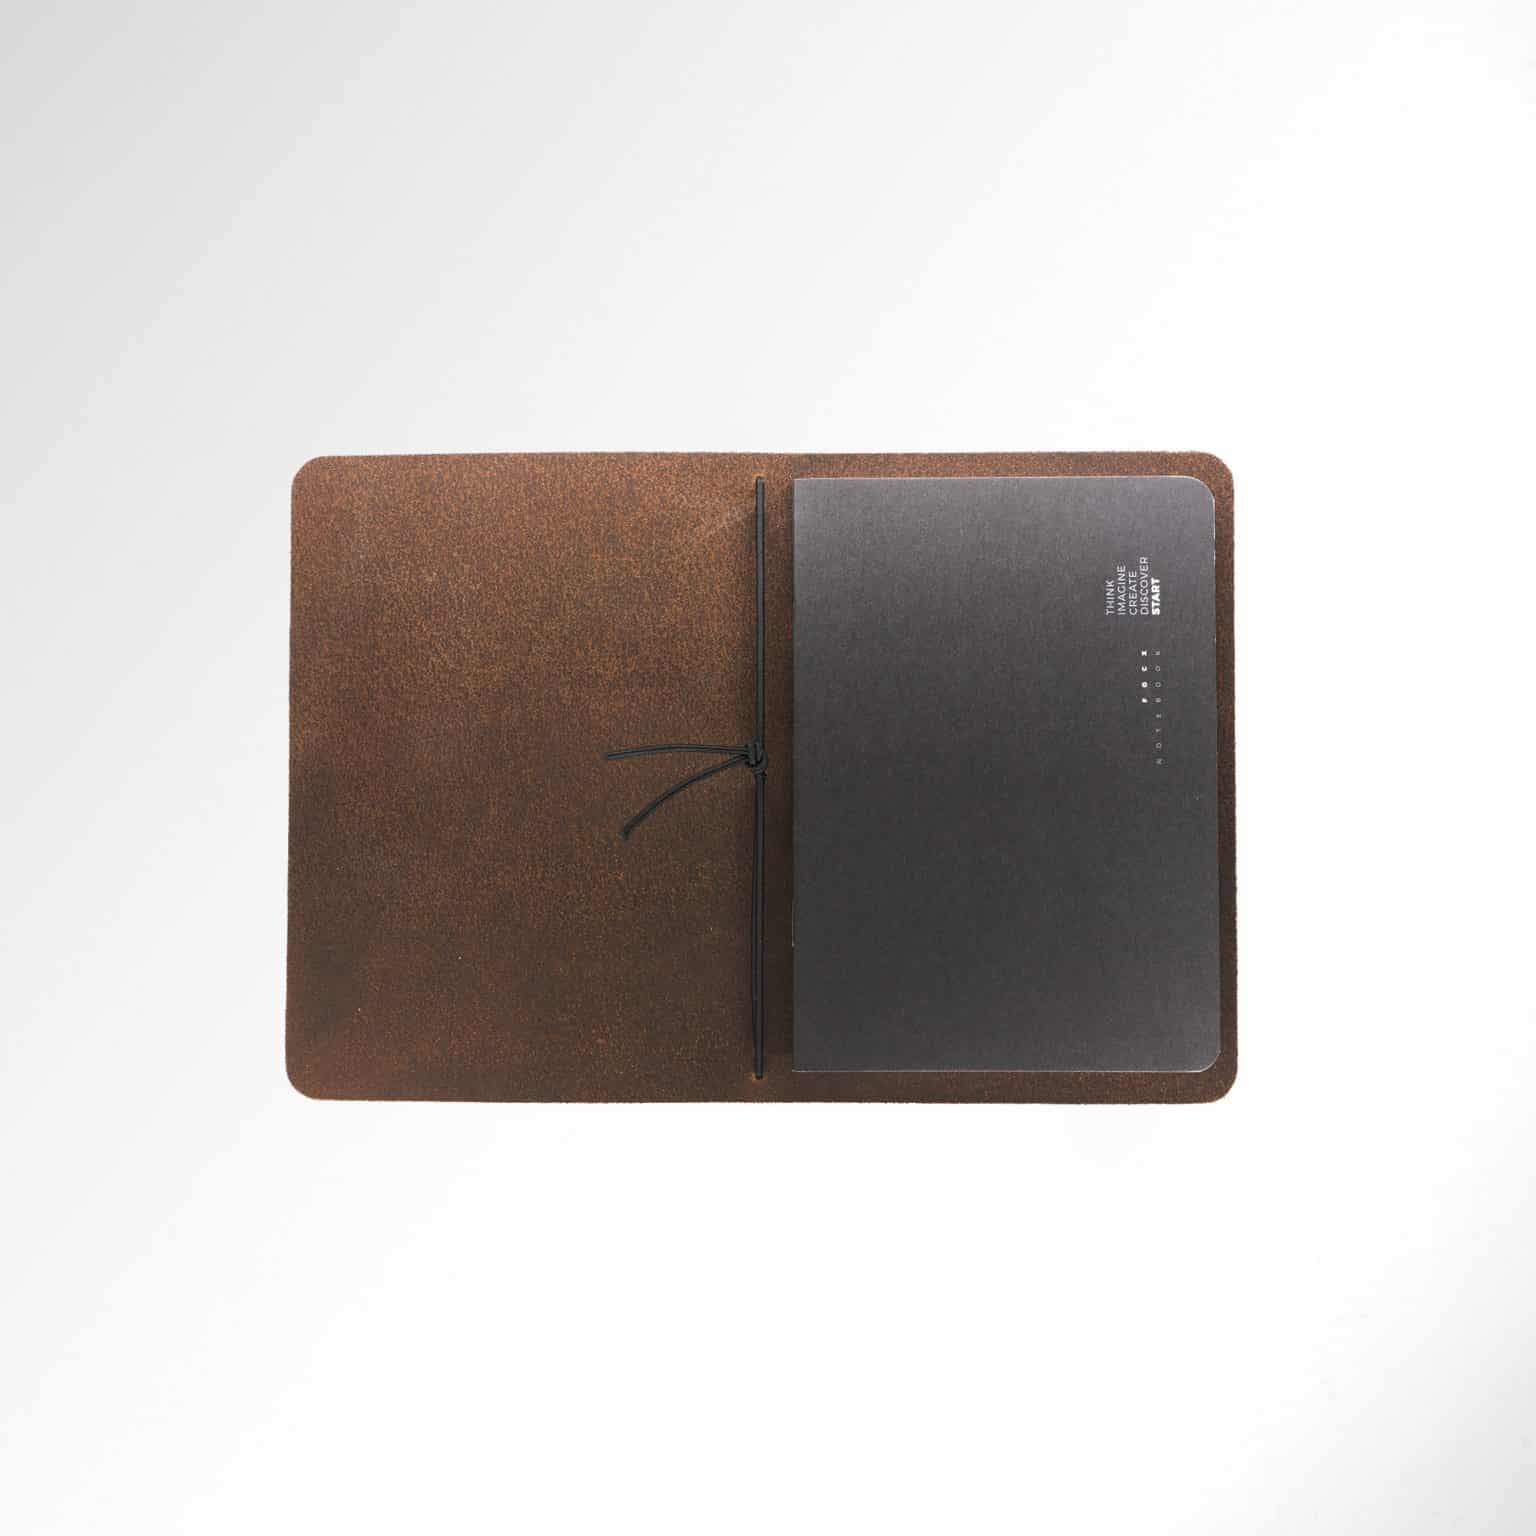 Compact wallet designed for essential storage